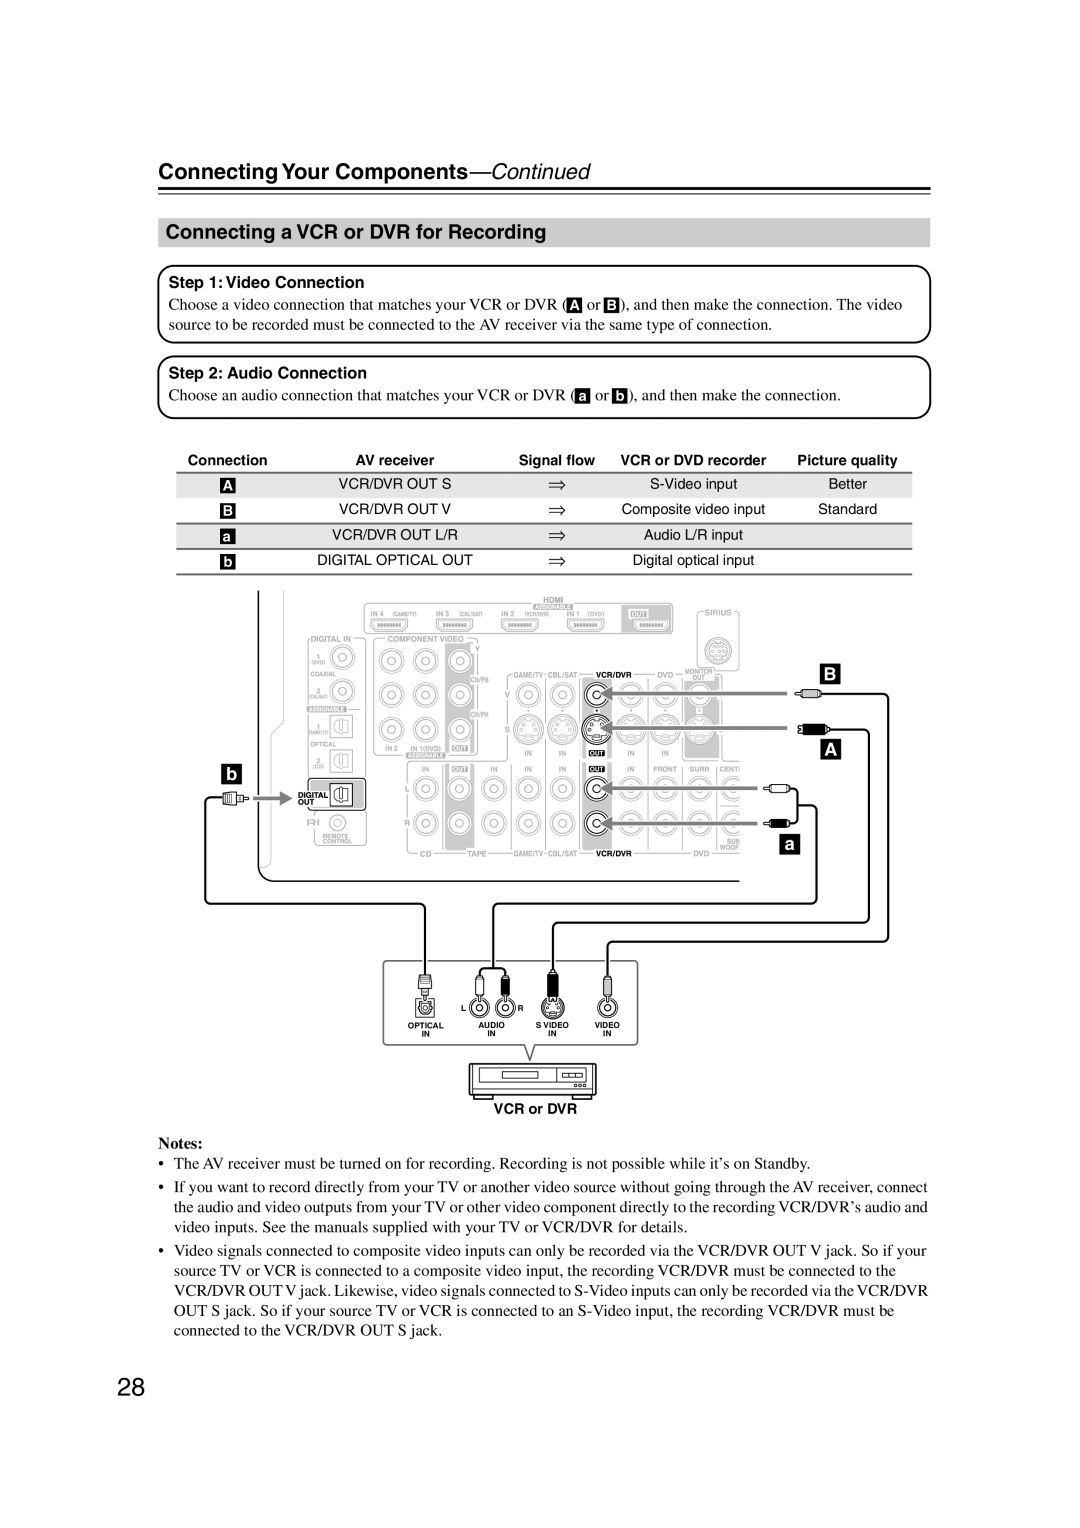 Integra DTR-5.9 instruction manual Connecting a VCR or DVR for Recording, Connecting Your Components—Continued 